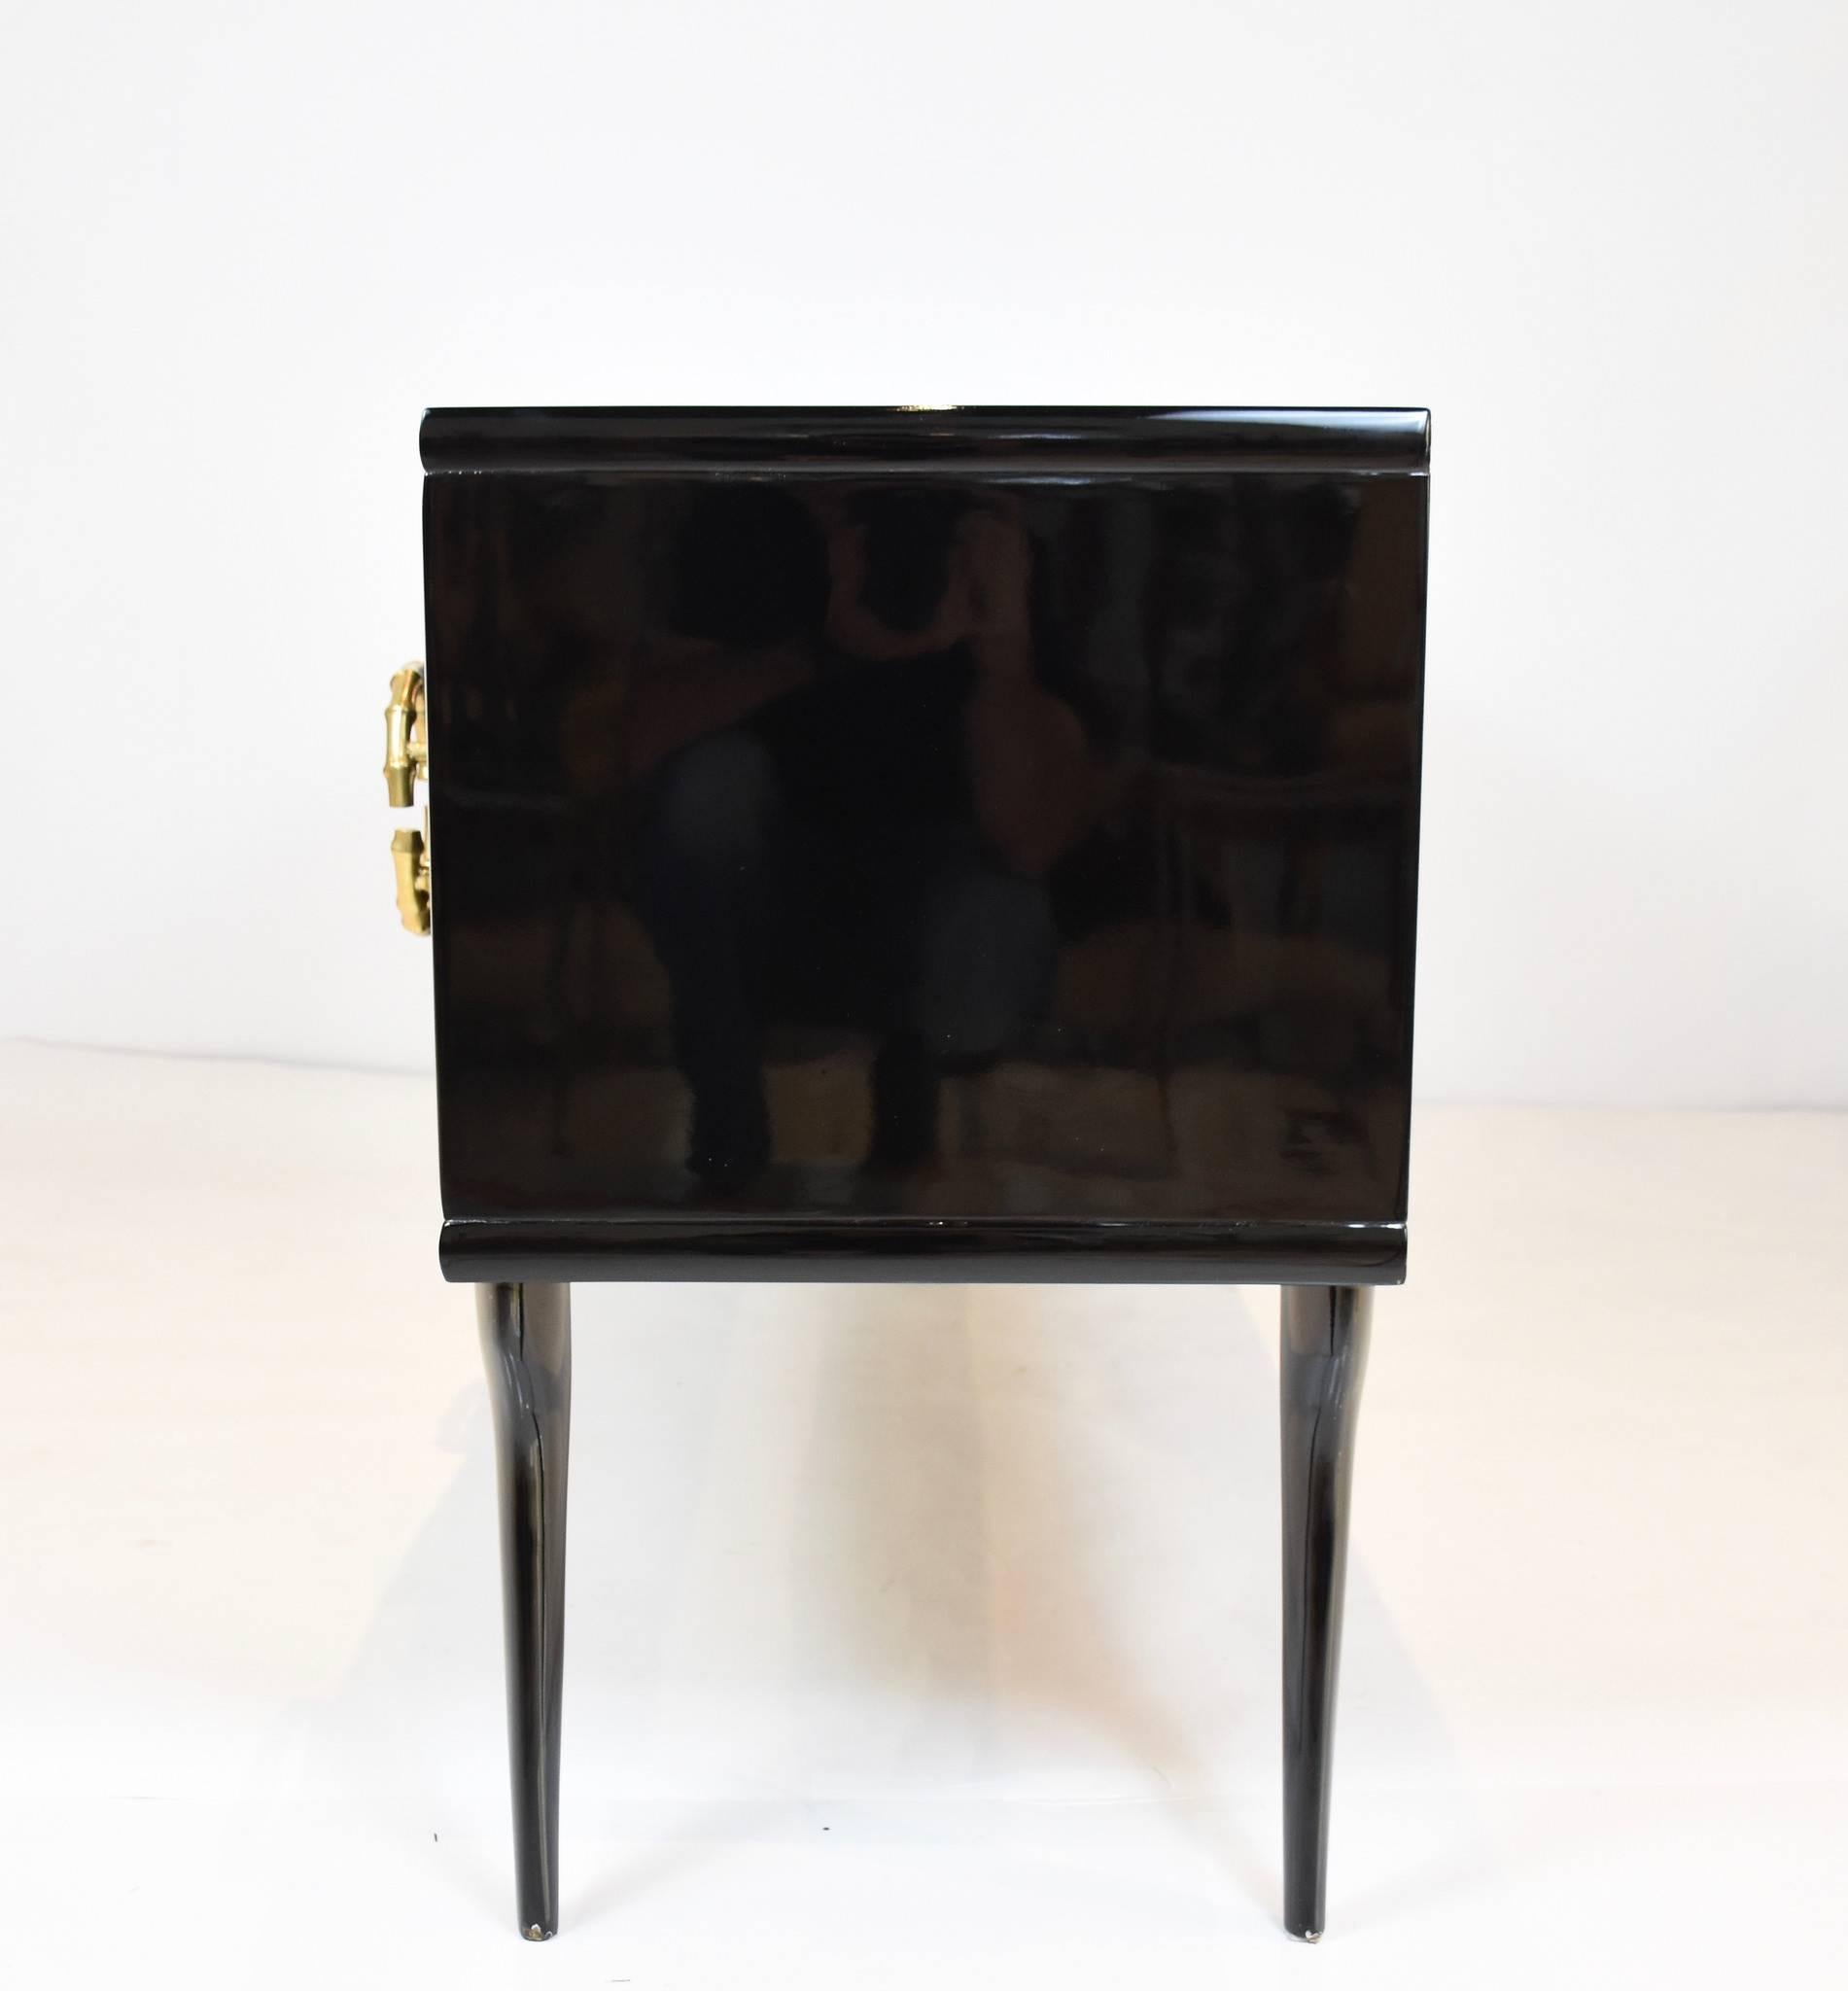 A chic black lacquered six drawer credenza with "gilt bronze" bamboo hardware from Milan, circa 1960s.

Overall dimensions including handles 21.5" D X 67.5" W X 30.5" H
Top dimensions 20" D X 67.5" W.